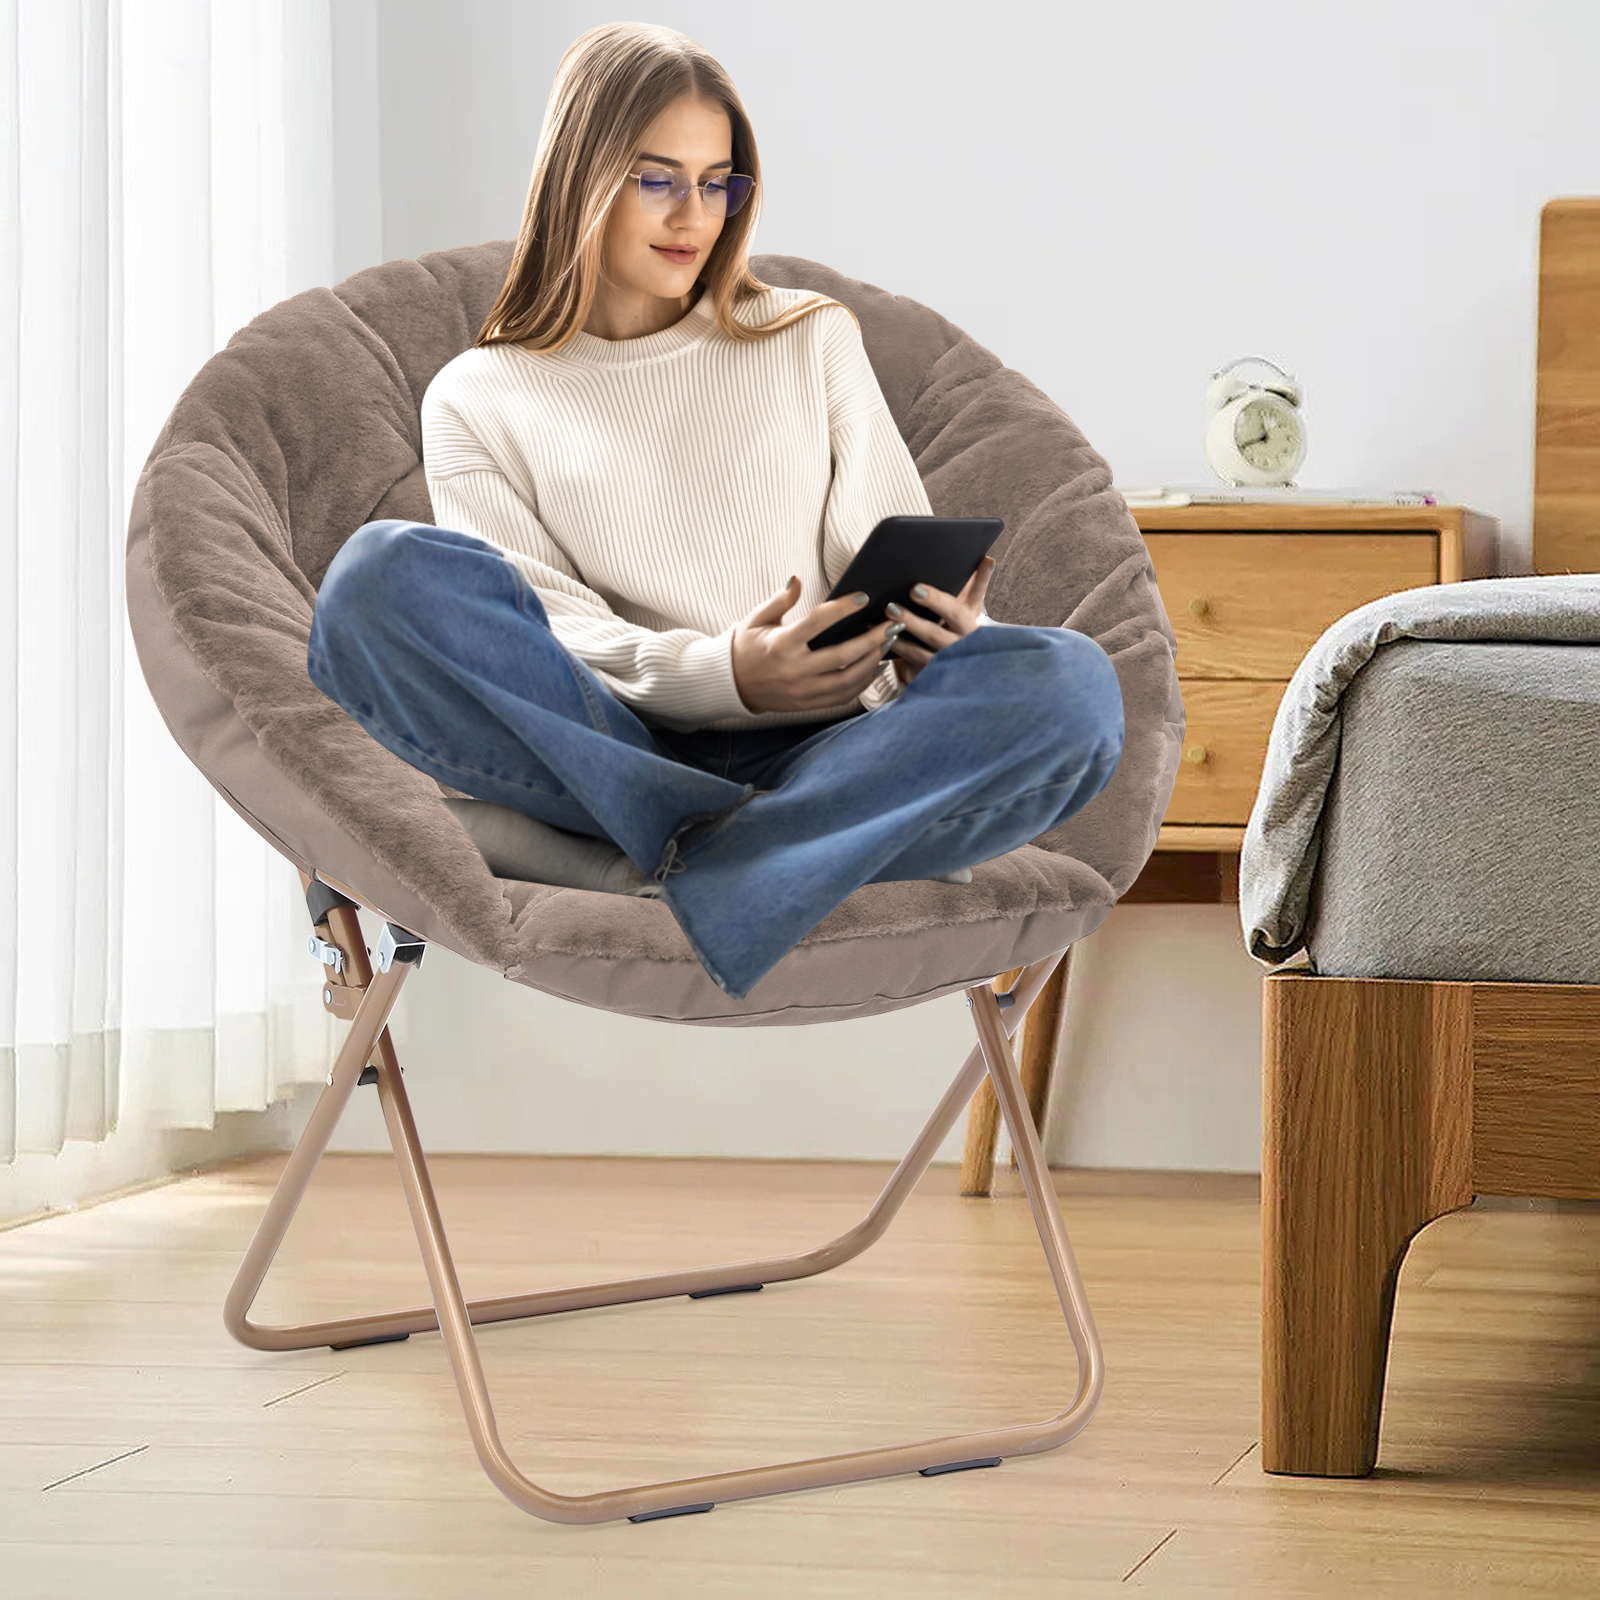 Magshion Set of 2 Comfy Saucer Chair, Foldable Faux Fur Lounge Chair for Bedroom Living Room, Cozy Moon Chair with Metal Frame for Adults, X-Large, Beige - image 4 of 10